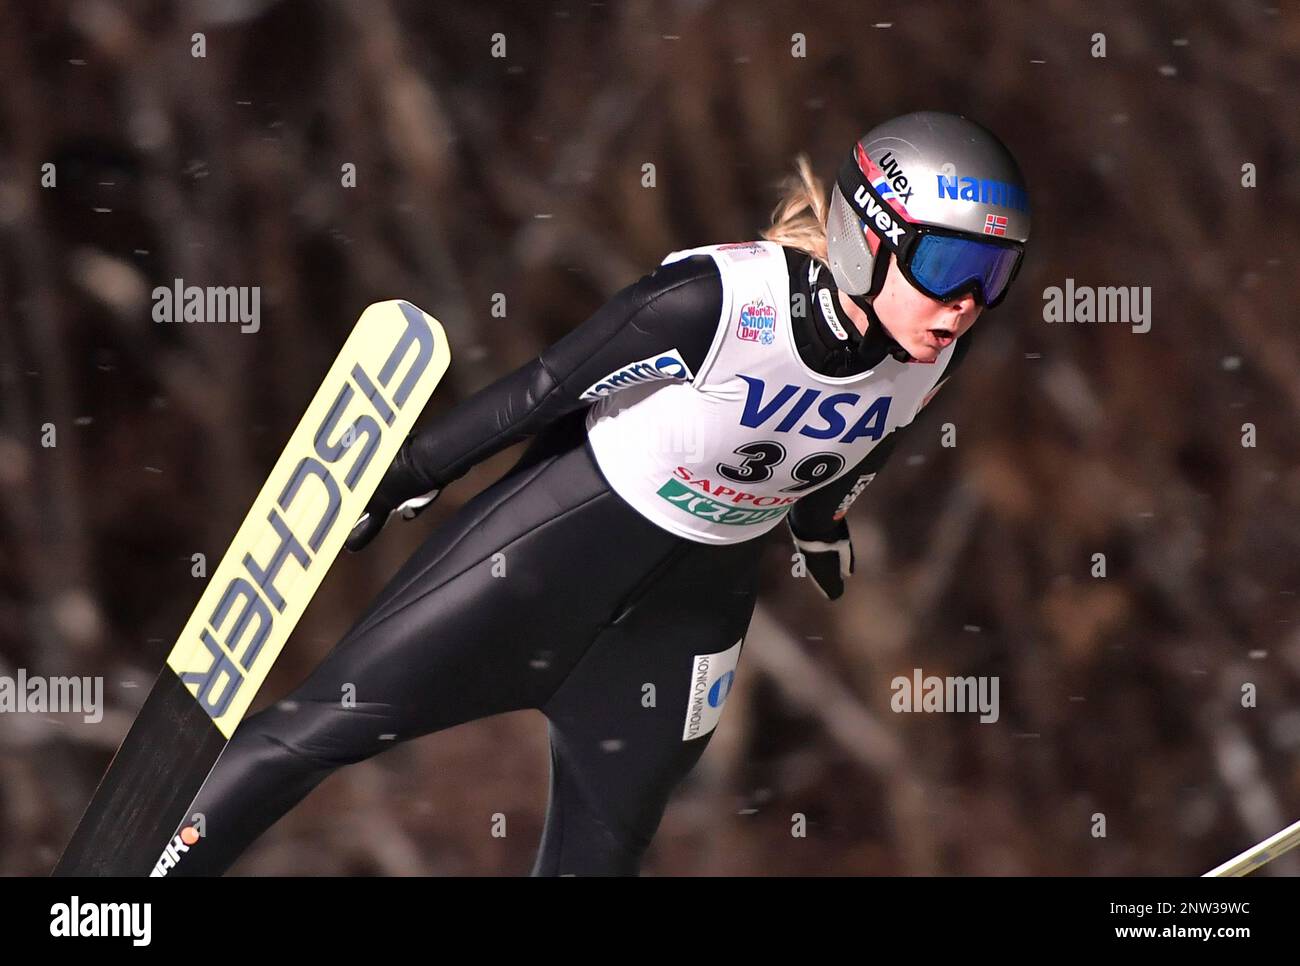 Norway's Maren LUNDBY sores through the air during the Large Hill  Individual in 7th World Cup Competition in Sapporo, Hokkaido Prefecture on  January 12, 2019. LUNDBY placed 3rd in the event. (